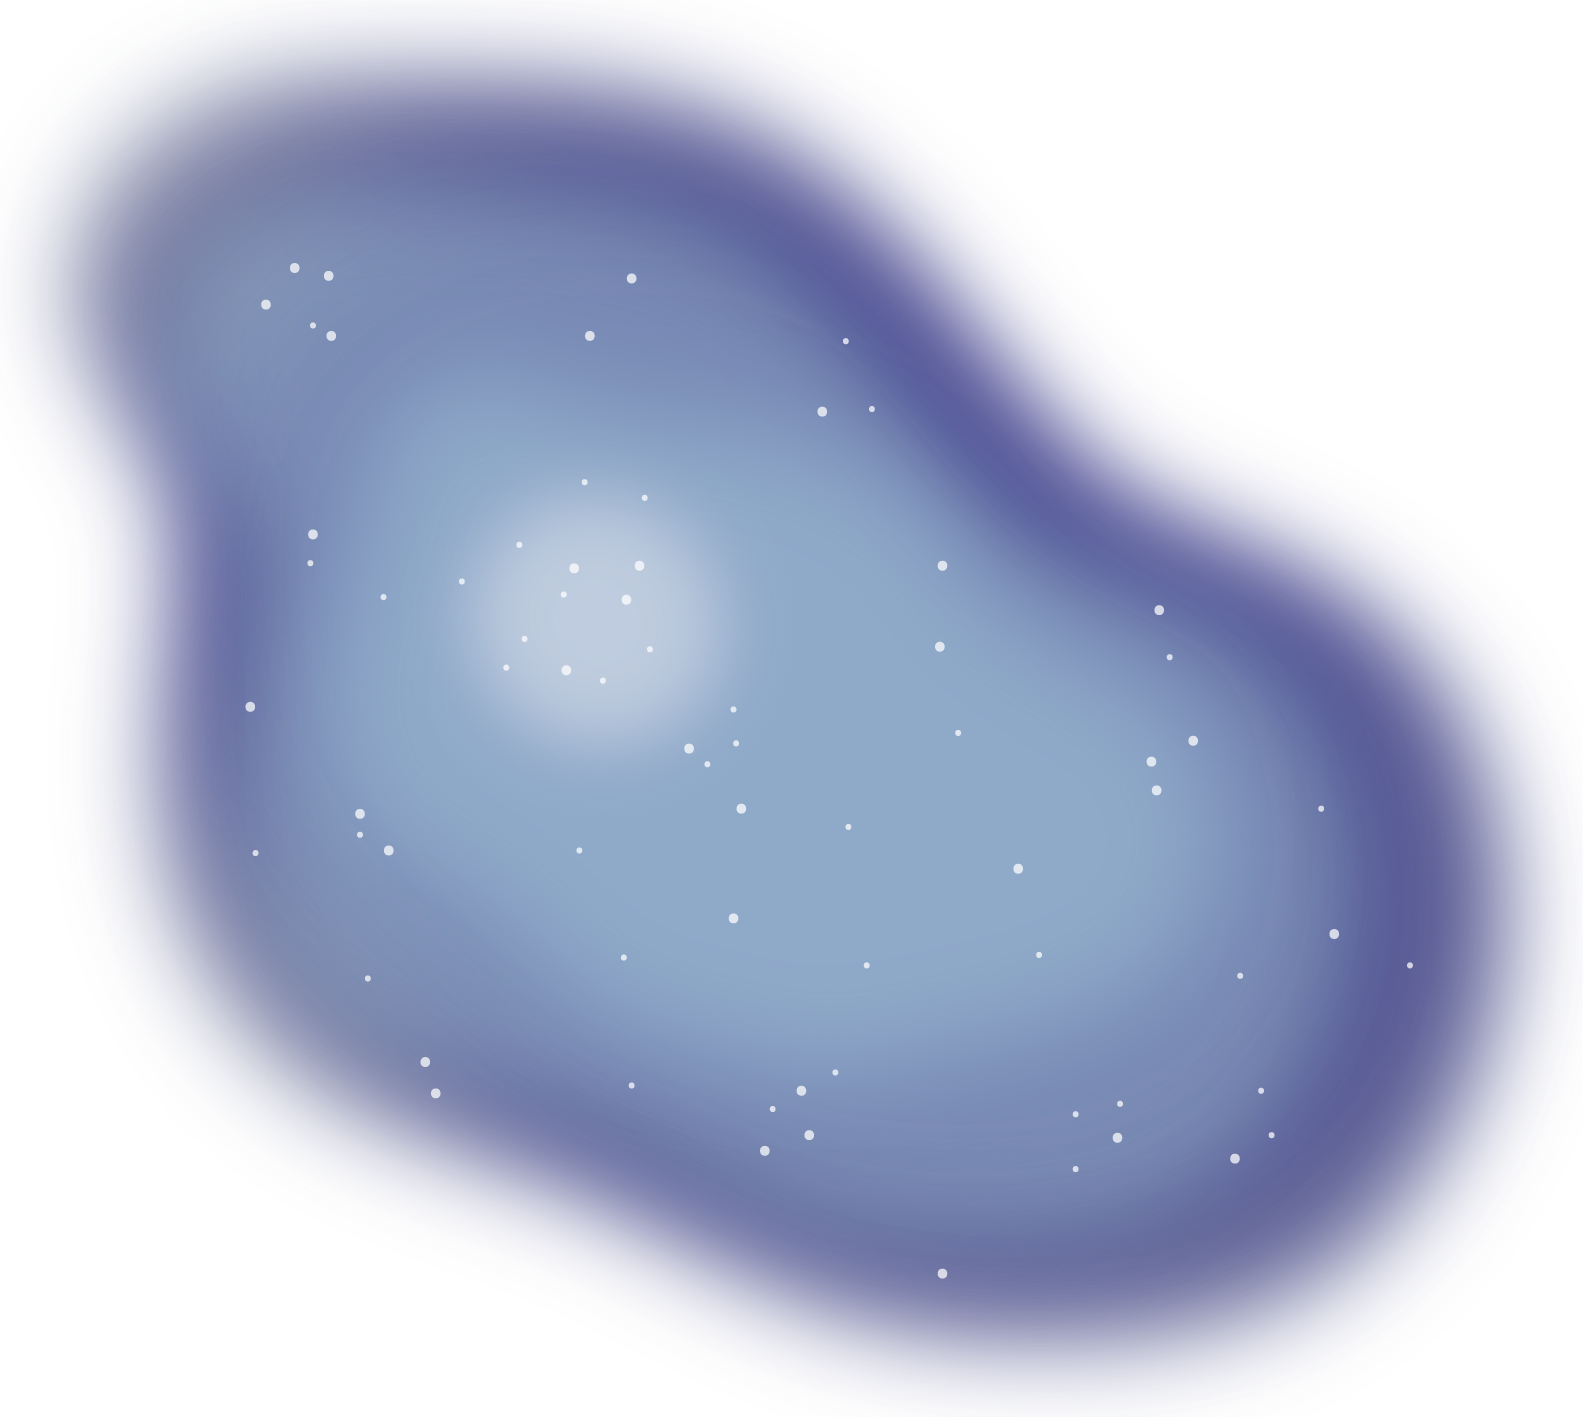 An amorphous, diffuse purple blob that's darker around the rim with a light, whitish center. White dots representing stars speckle the image.